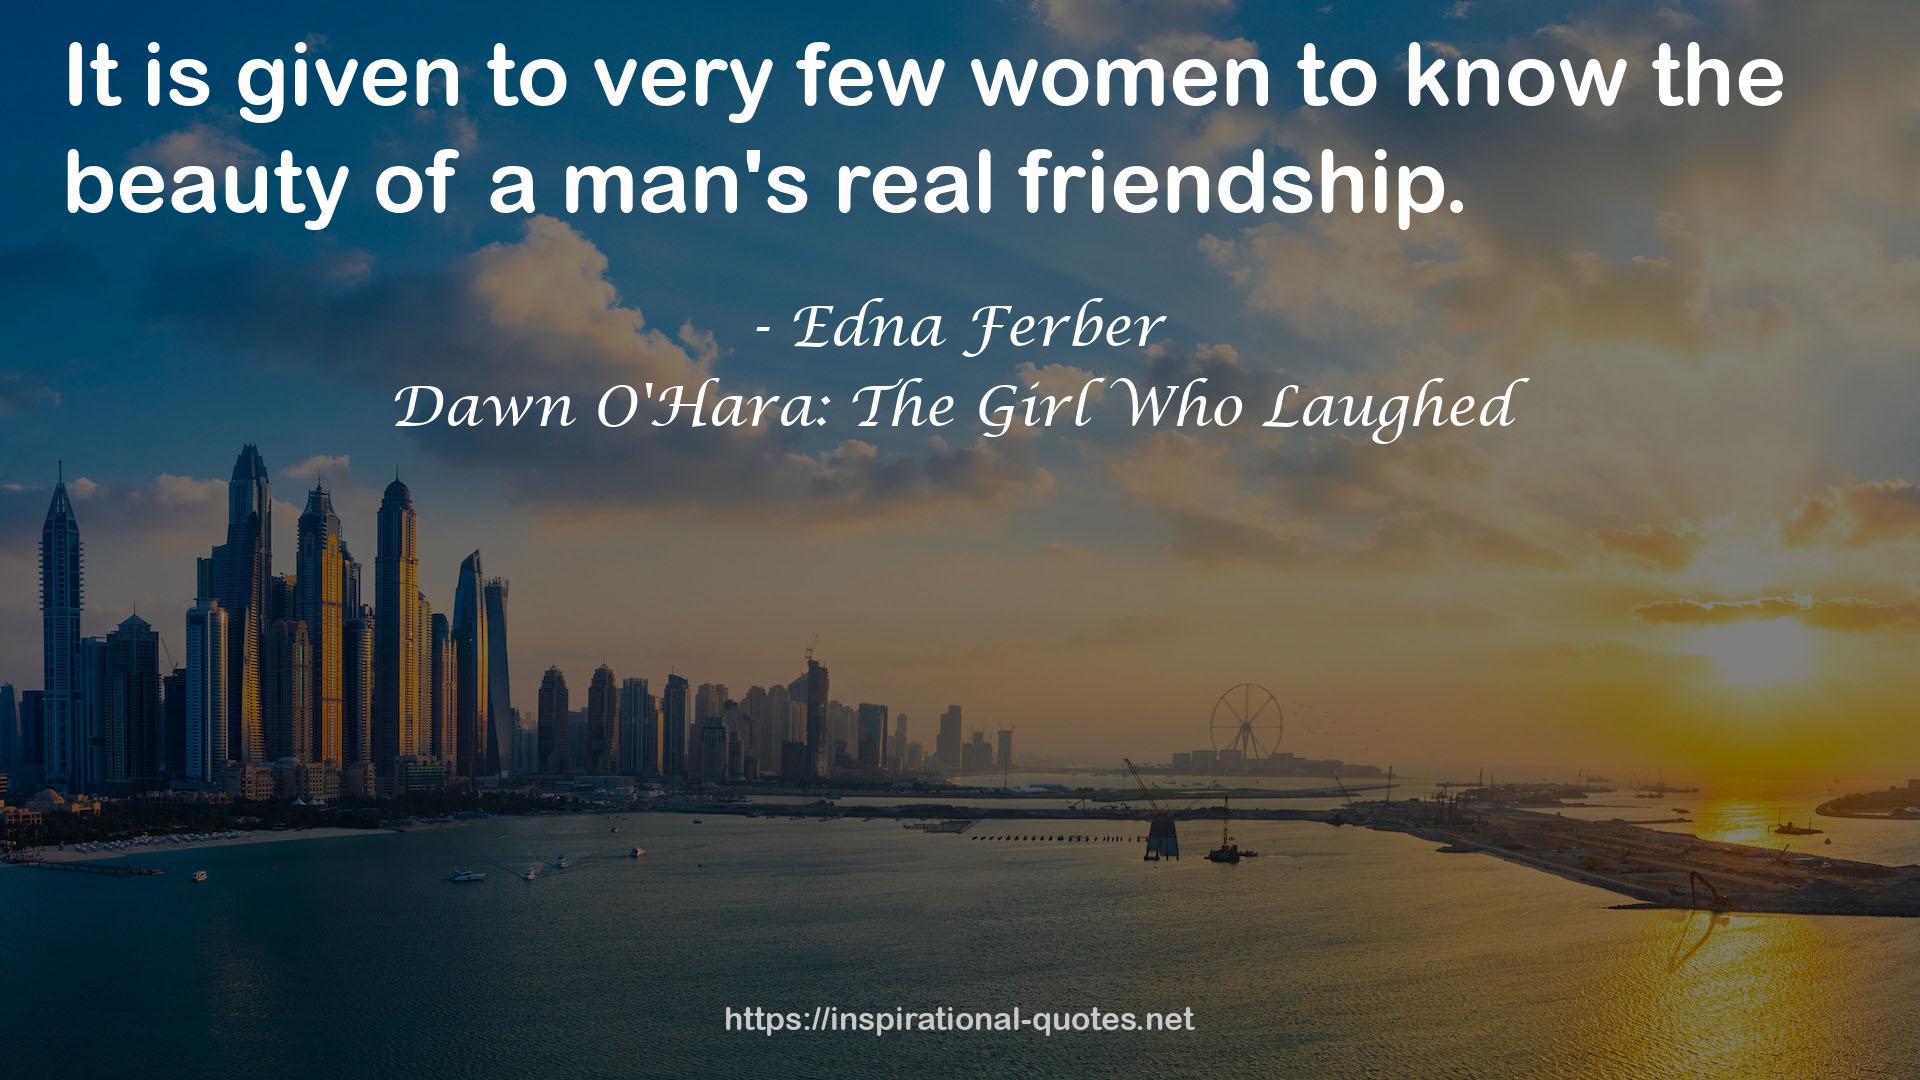 Dawn O'Hara: The Girl Who Laughed QUOTES